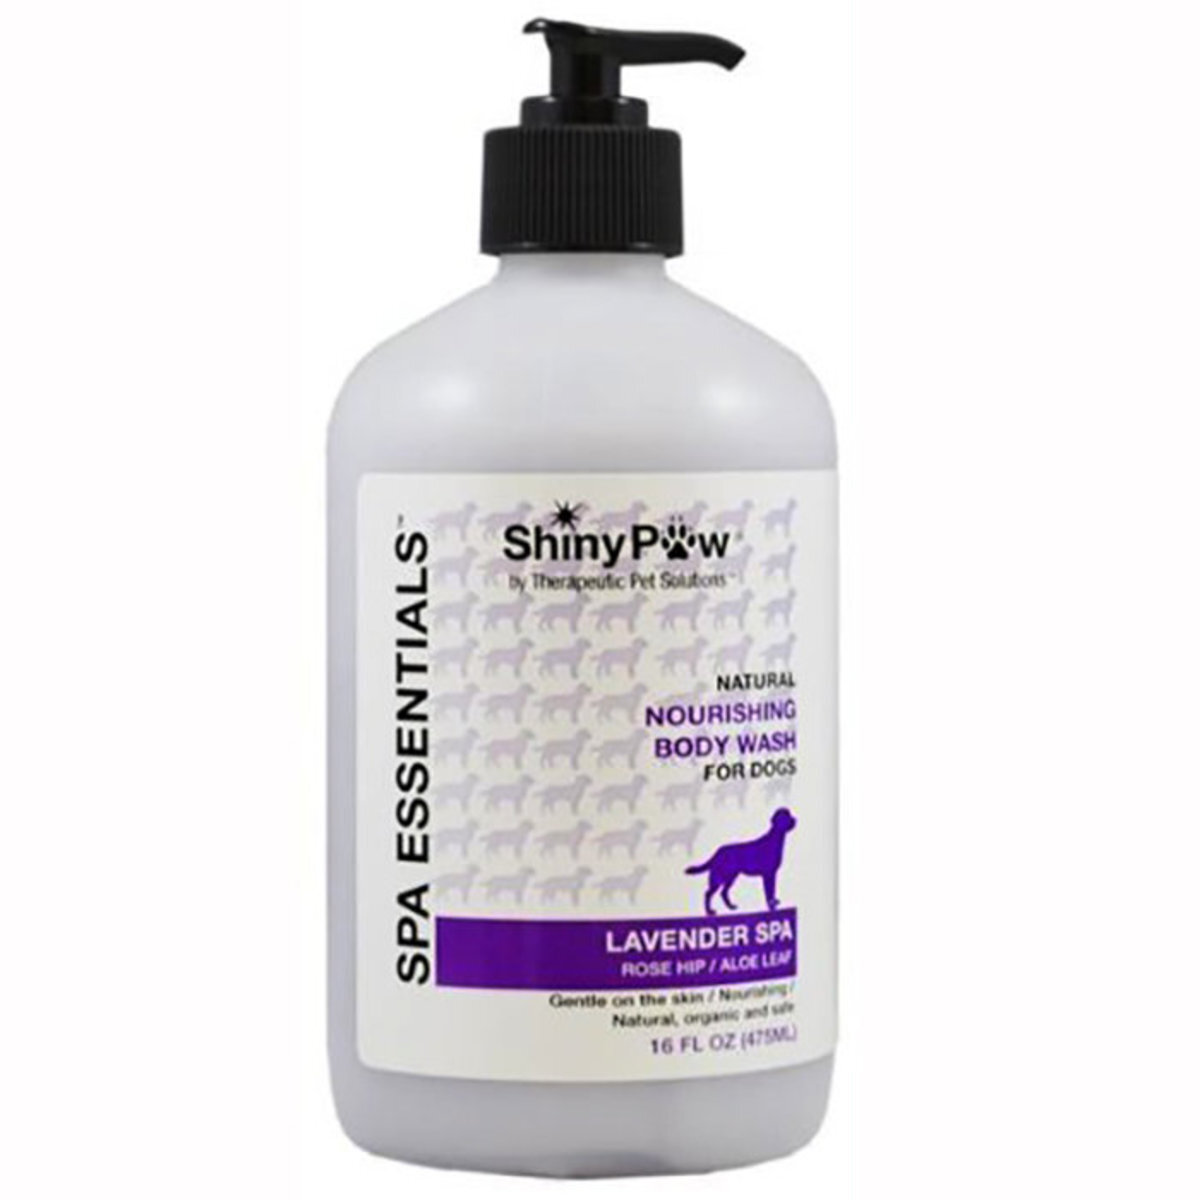 Natural Nourishing Body Wash For Dogs 475ml